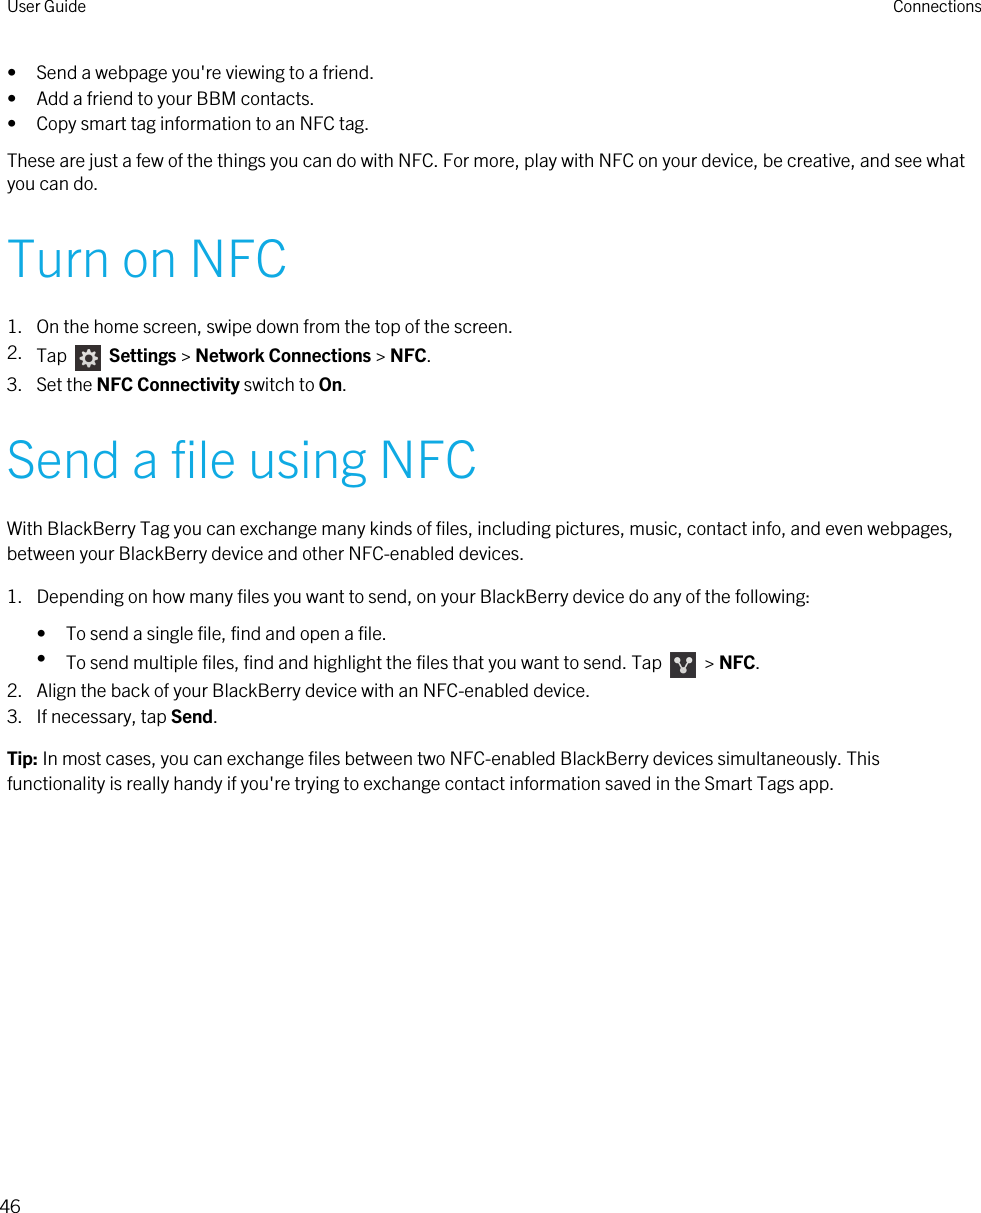 • Send a webpage you&apos;re viewing to a friend.• Add a friend to your BBM contacts.• Copy smart tag information to an NFC tag.These are just a few of the things you can do with NFC. For more, play with NFC on your device, be creative, and see what you can do.Turn on NFC1. On the home screen, swipe down from the top of the screen.2. Tap    Settings &gt; Network Connections &gt; NFC.3. Set the NFC Connectivity switch to On.Send a file using NFCWith BlackBerry Tag you can exchange many kinds of files, including pictures, music, contact info, and even webpages, between your BlackBerry device and other NFC-enabled devices.1. Depending on how many files you want to send, on your BlackBerry device do any of the following:• To send a single file, find and open a file.•To send multiple files, find and highlight the files that you want to send. Tap    &gt; NFC.2. Align the back of your BlackBerry device with an NFC-enabled device.3. If necessary, tap Send.Tip: In most cases, you can exchange files between two NFC-enabled BlackBerry devices simultaneously. This functionality is really handy if you&apos;re trying to exchange contact information saved in the Smart Tags app.User Guide Connections46 